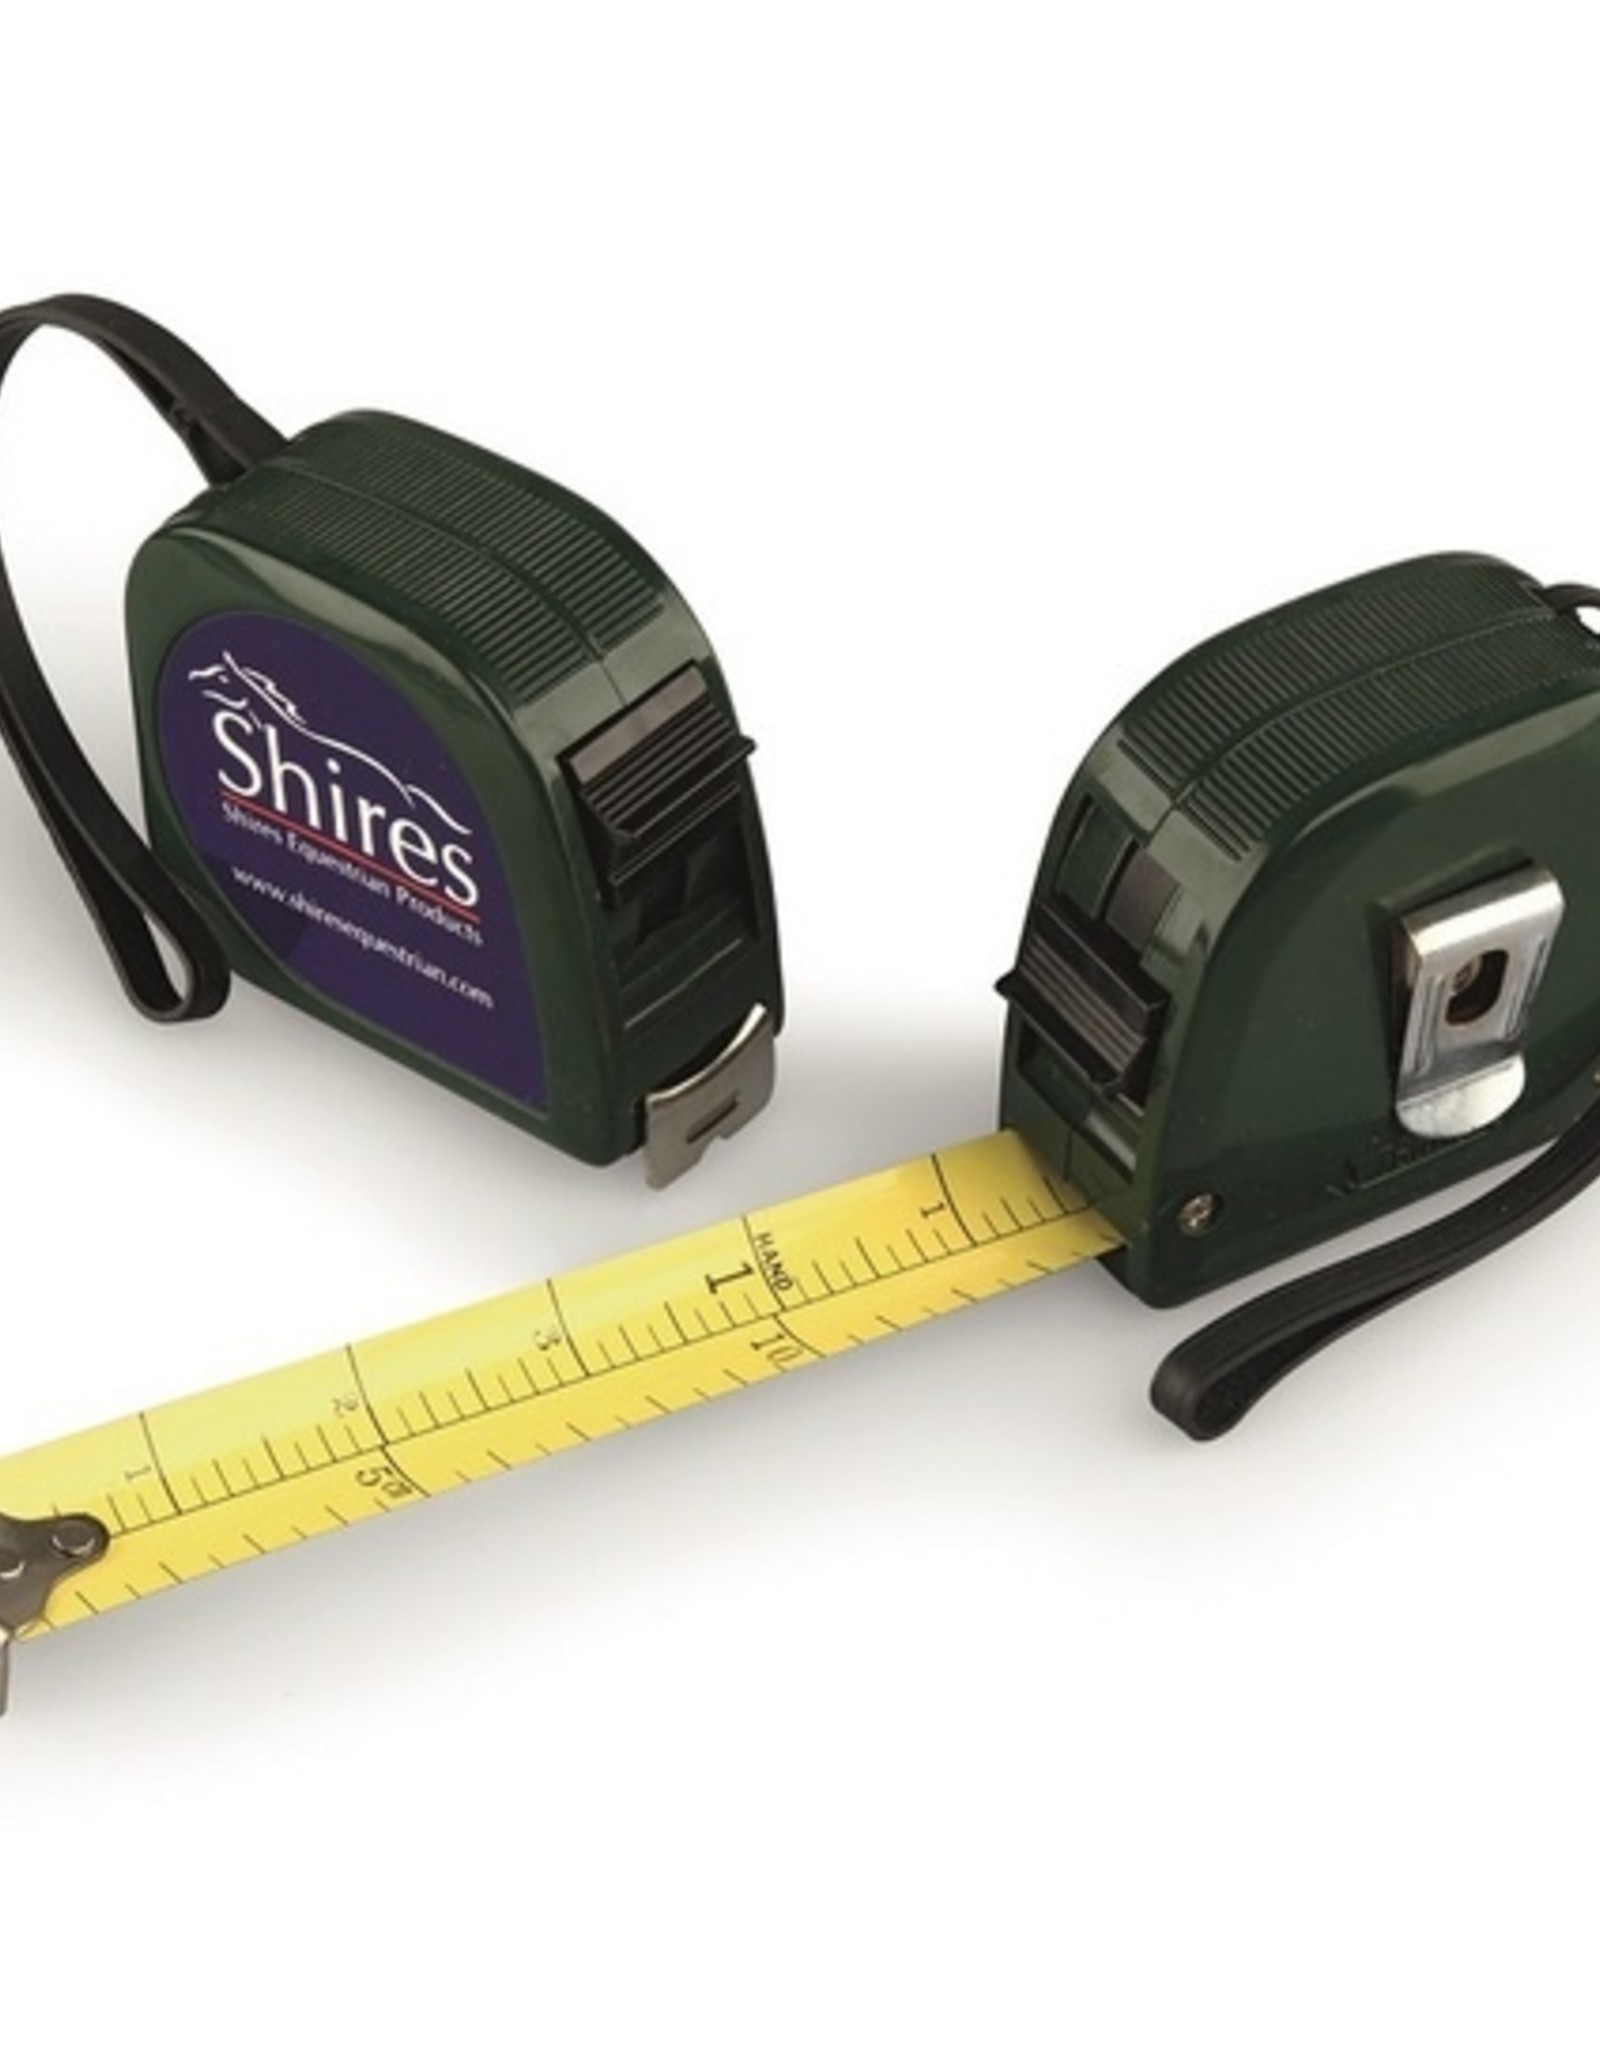 Horse measuring tape Shires